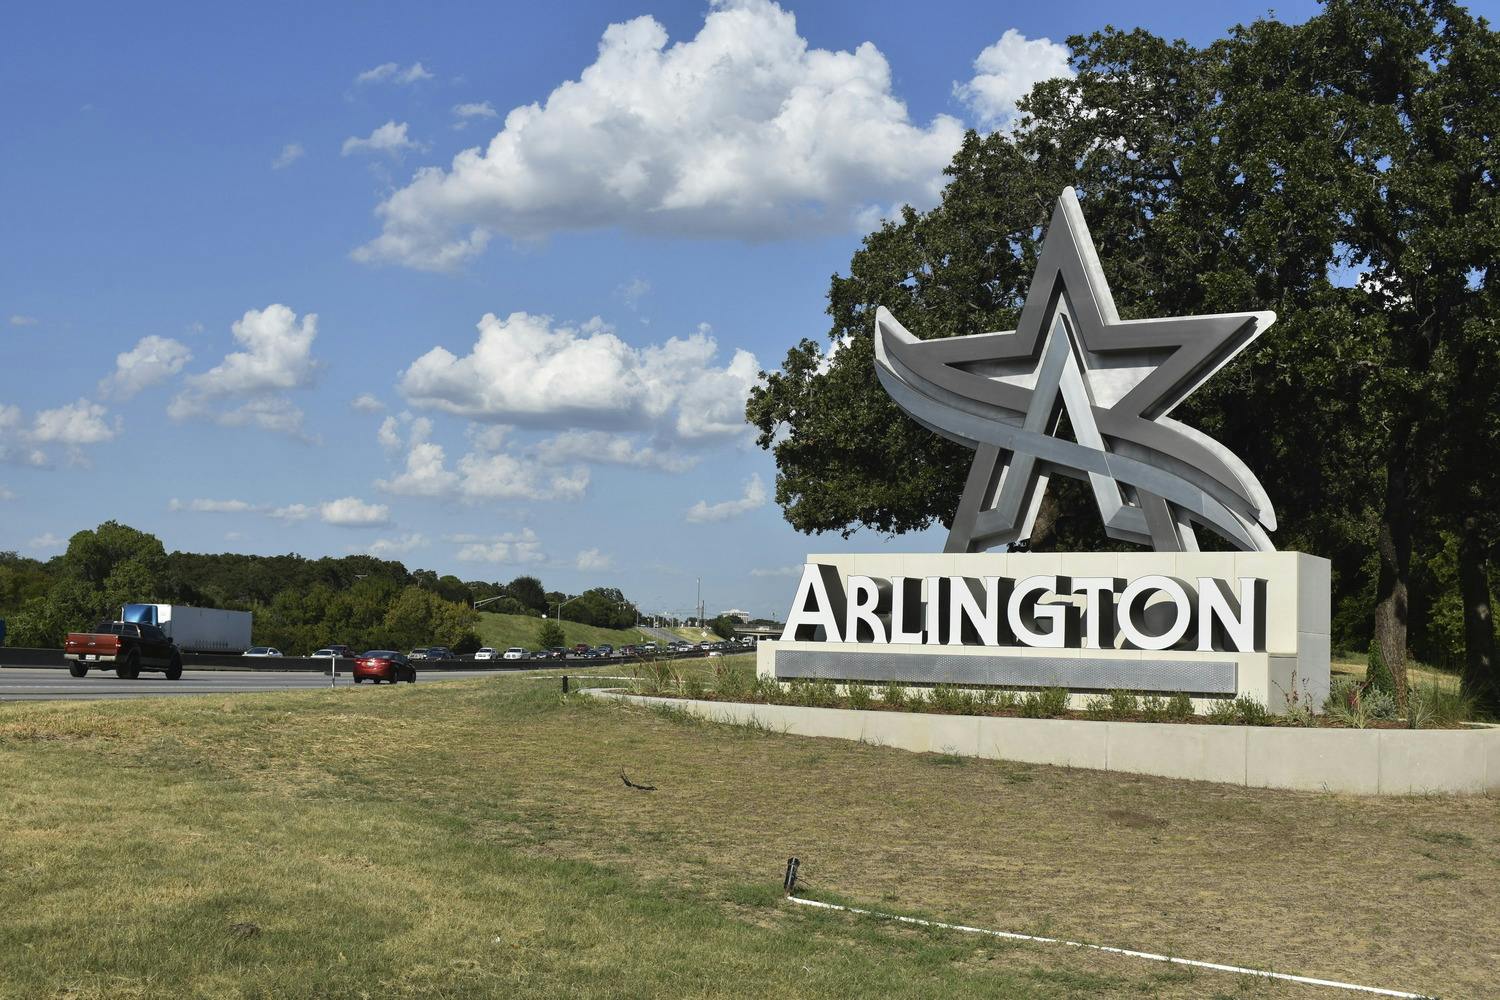 City of Arlington Newest Gateway Monument on Highway 287 Nearing Completion